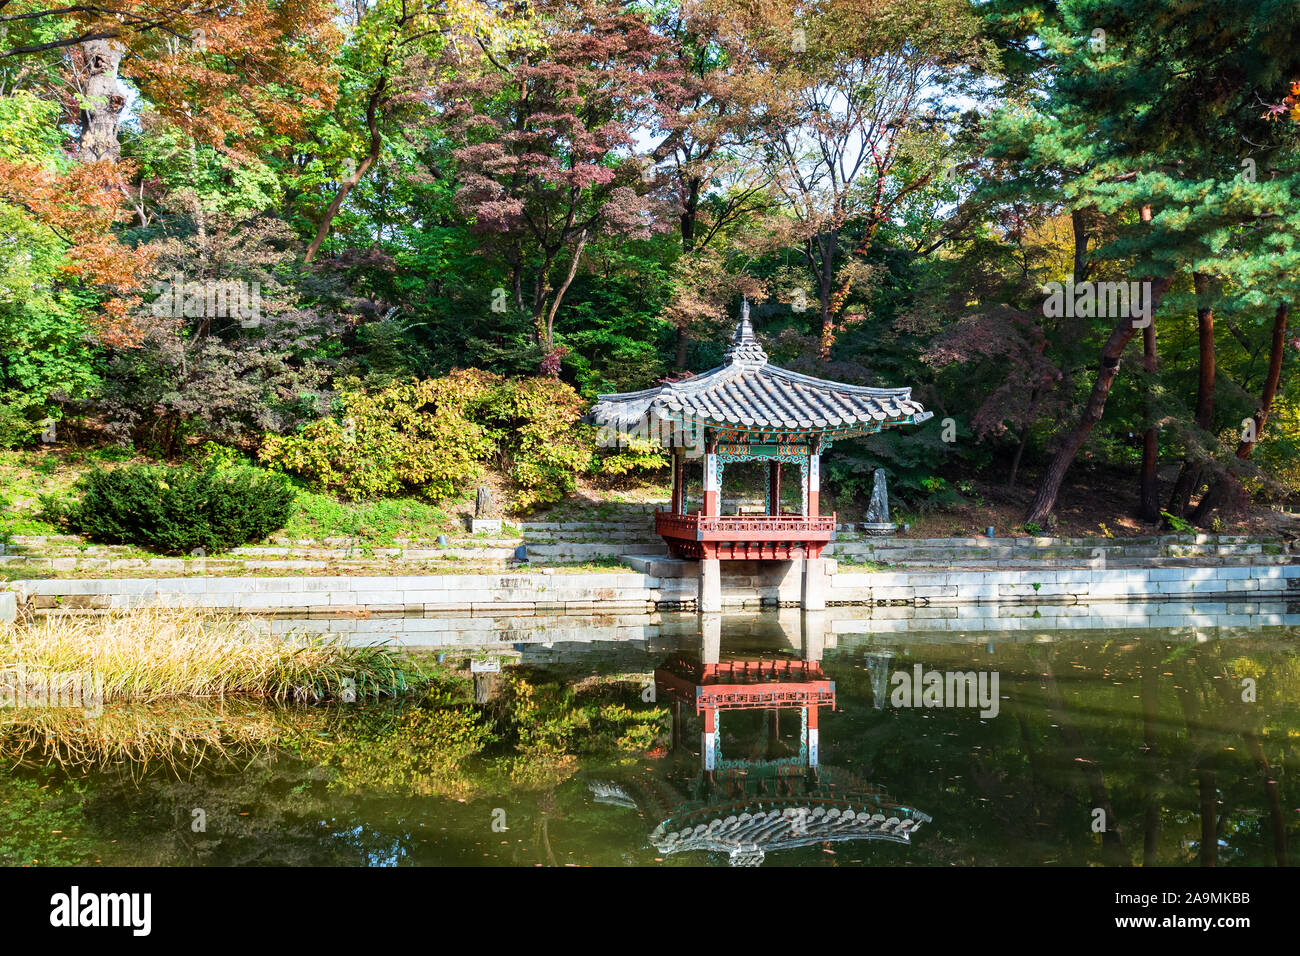 SEOUL, SOUTH KOREA - OCTOBER 31, 2019: ornamental Aeryeonjeong Pavilion and Aeryeonji pond in Huwon Secret Rear Garden of Changdeokgung Palace Complex Stock Photo